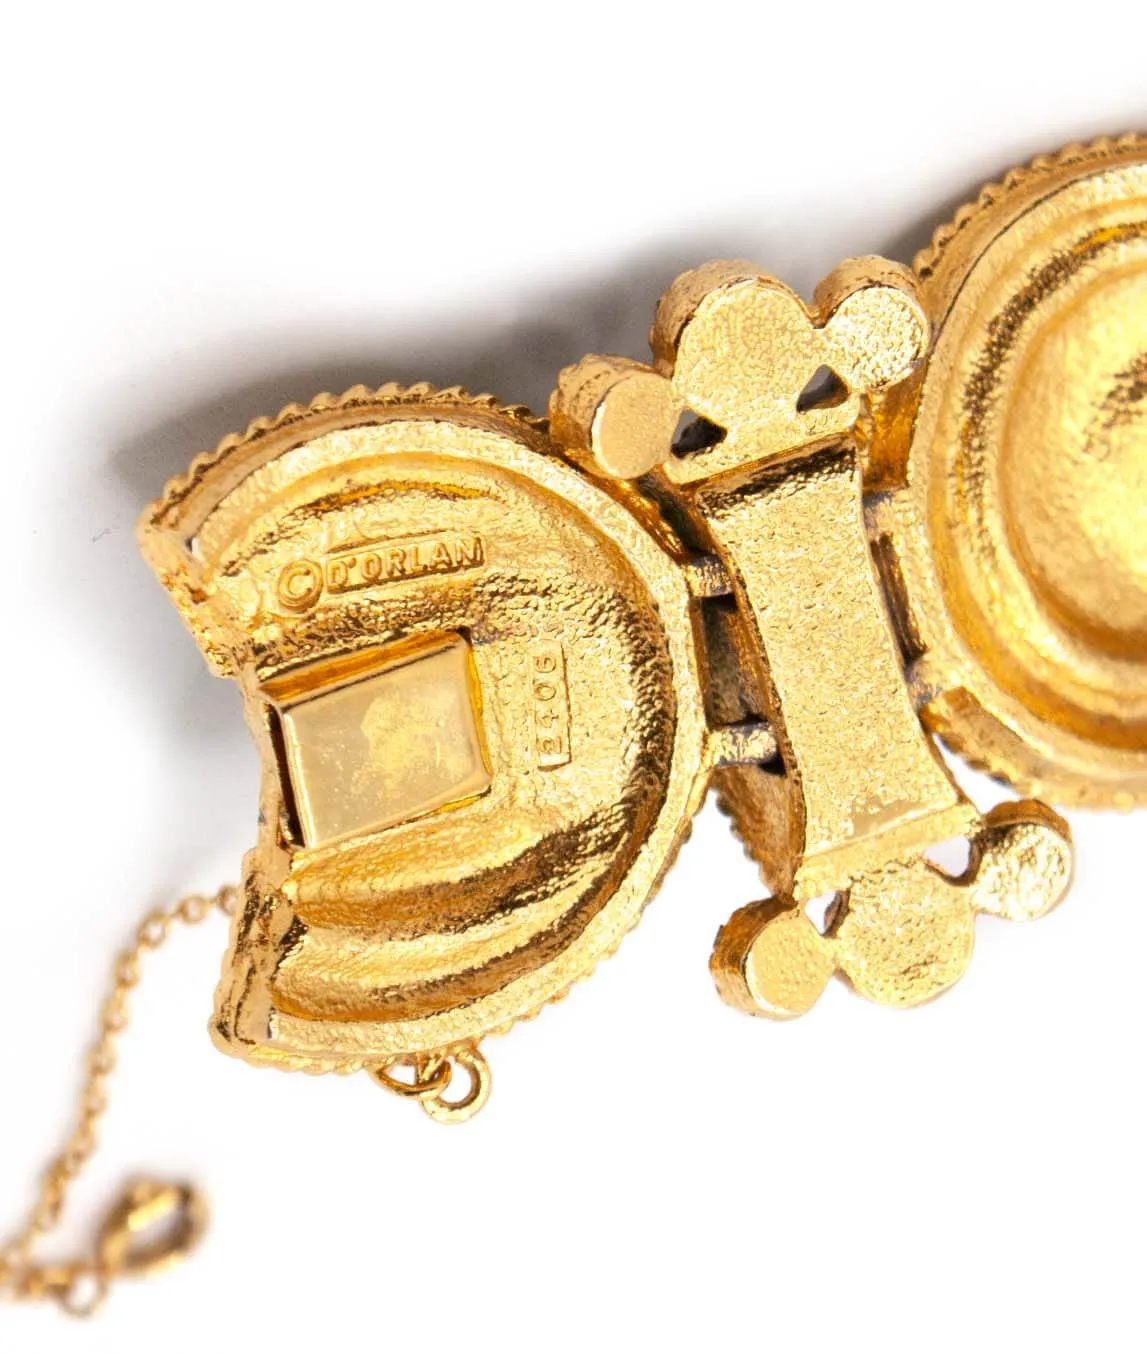 D'Orlan stamp and inventory number on gold plated bracelet